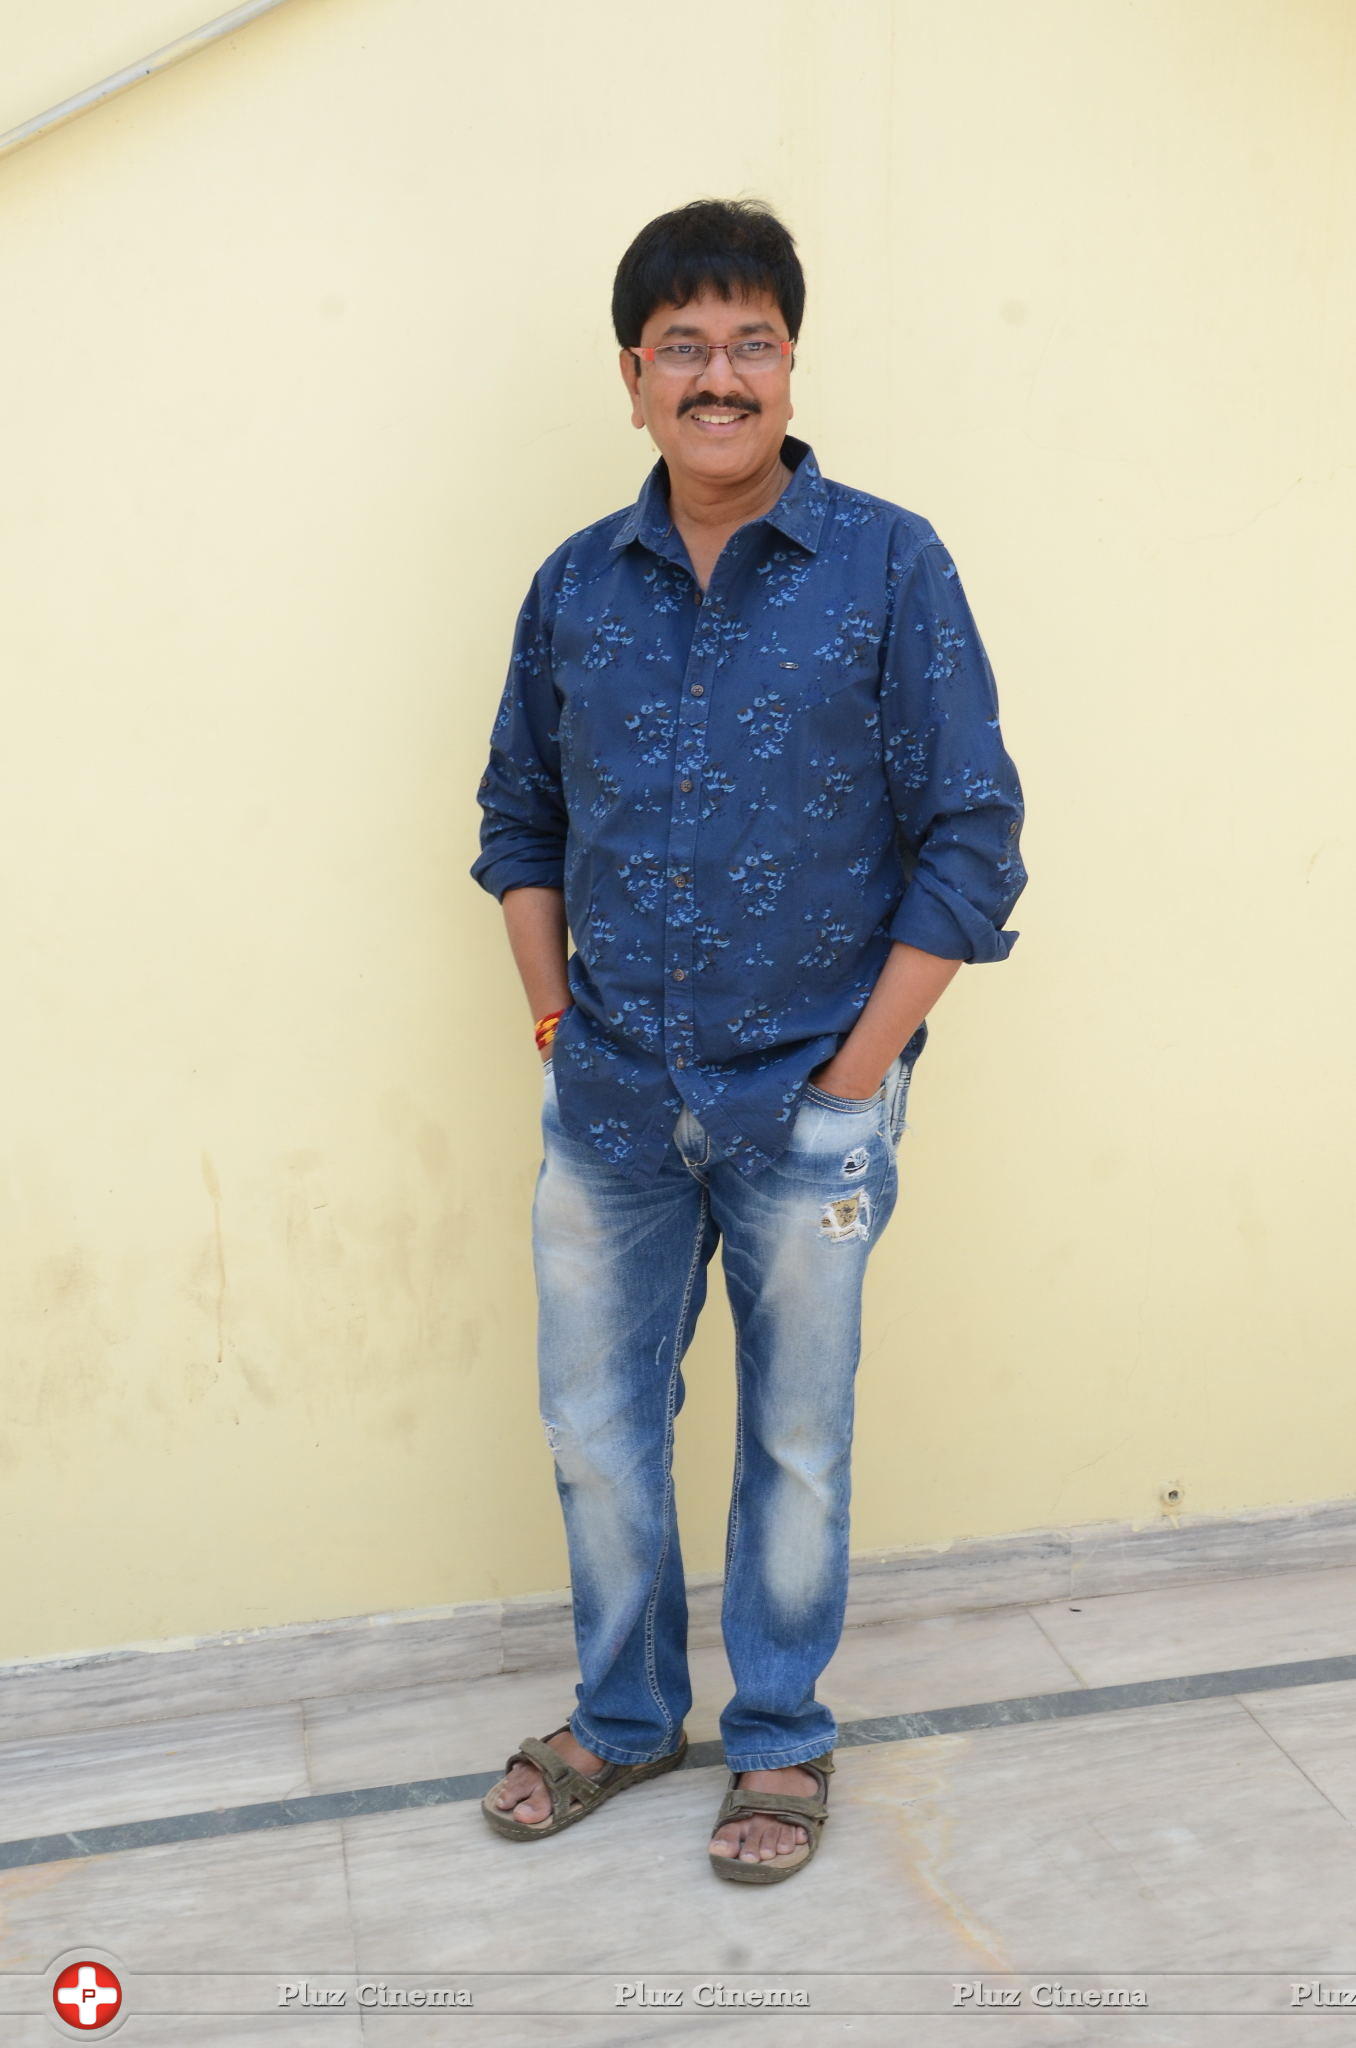 Director Nageswara Reddy Interview Photos | Picture 1286680